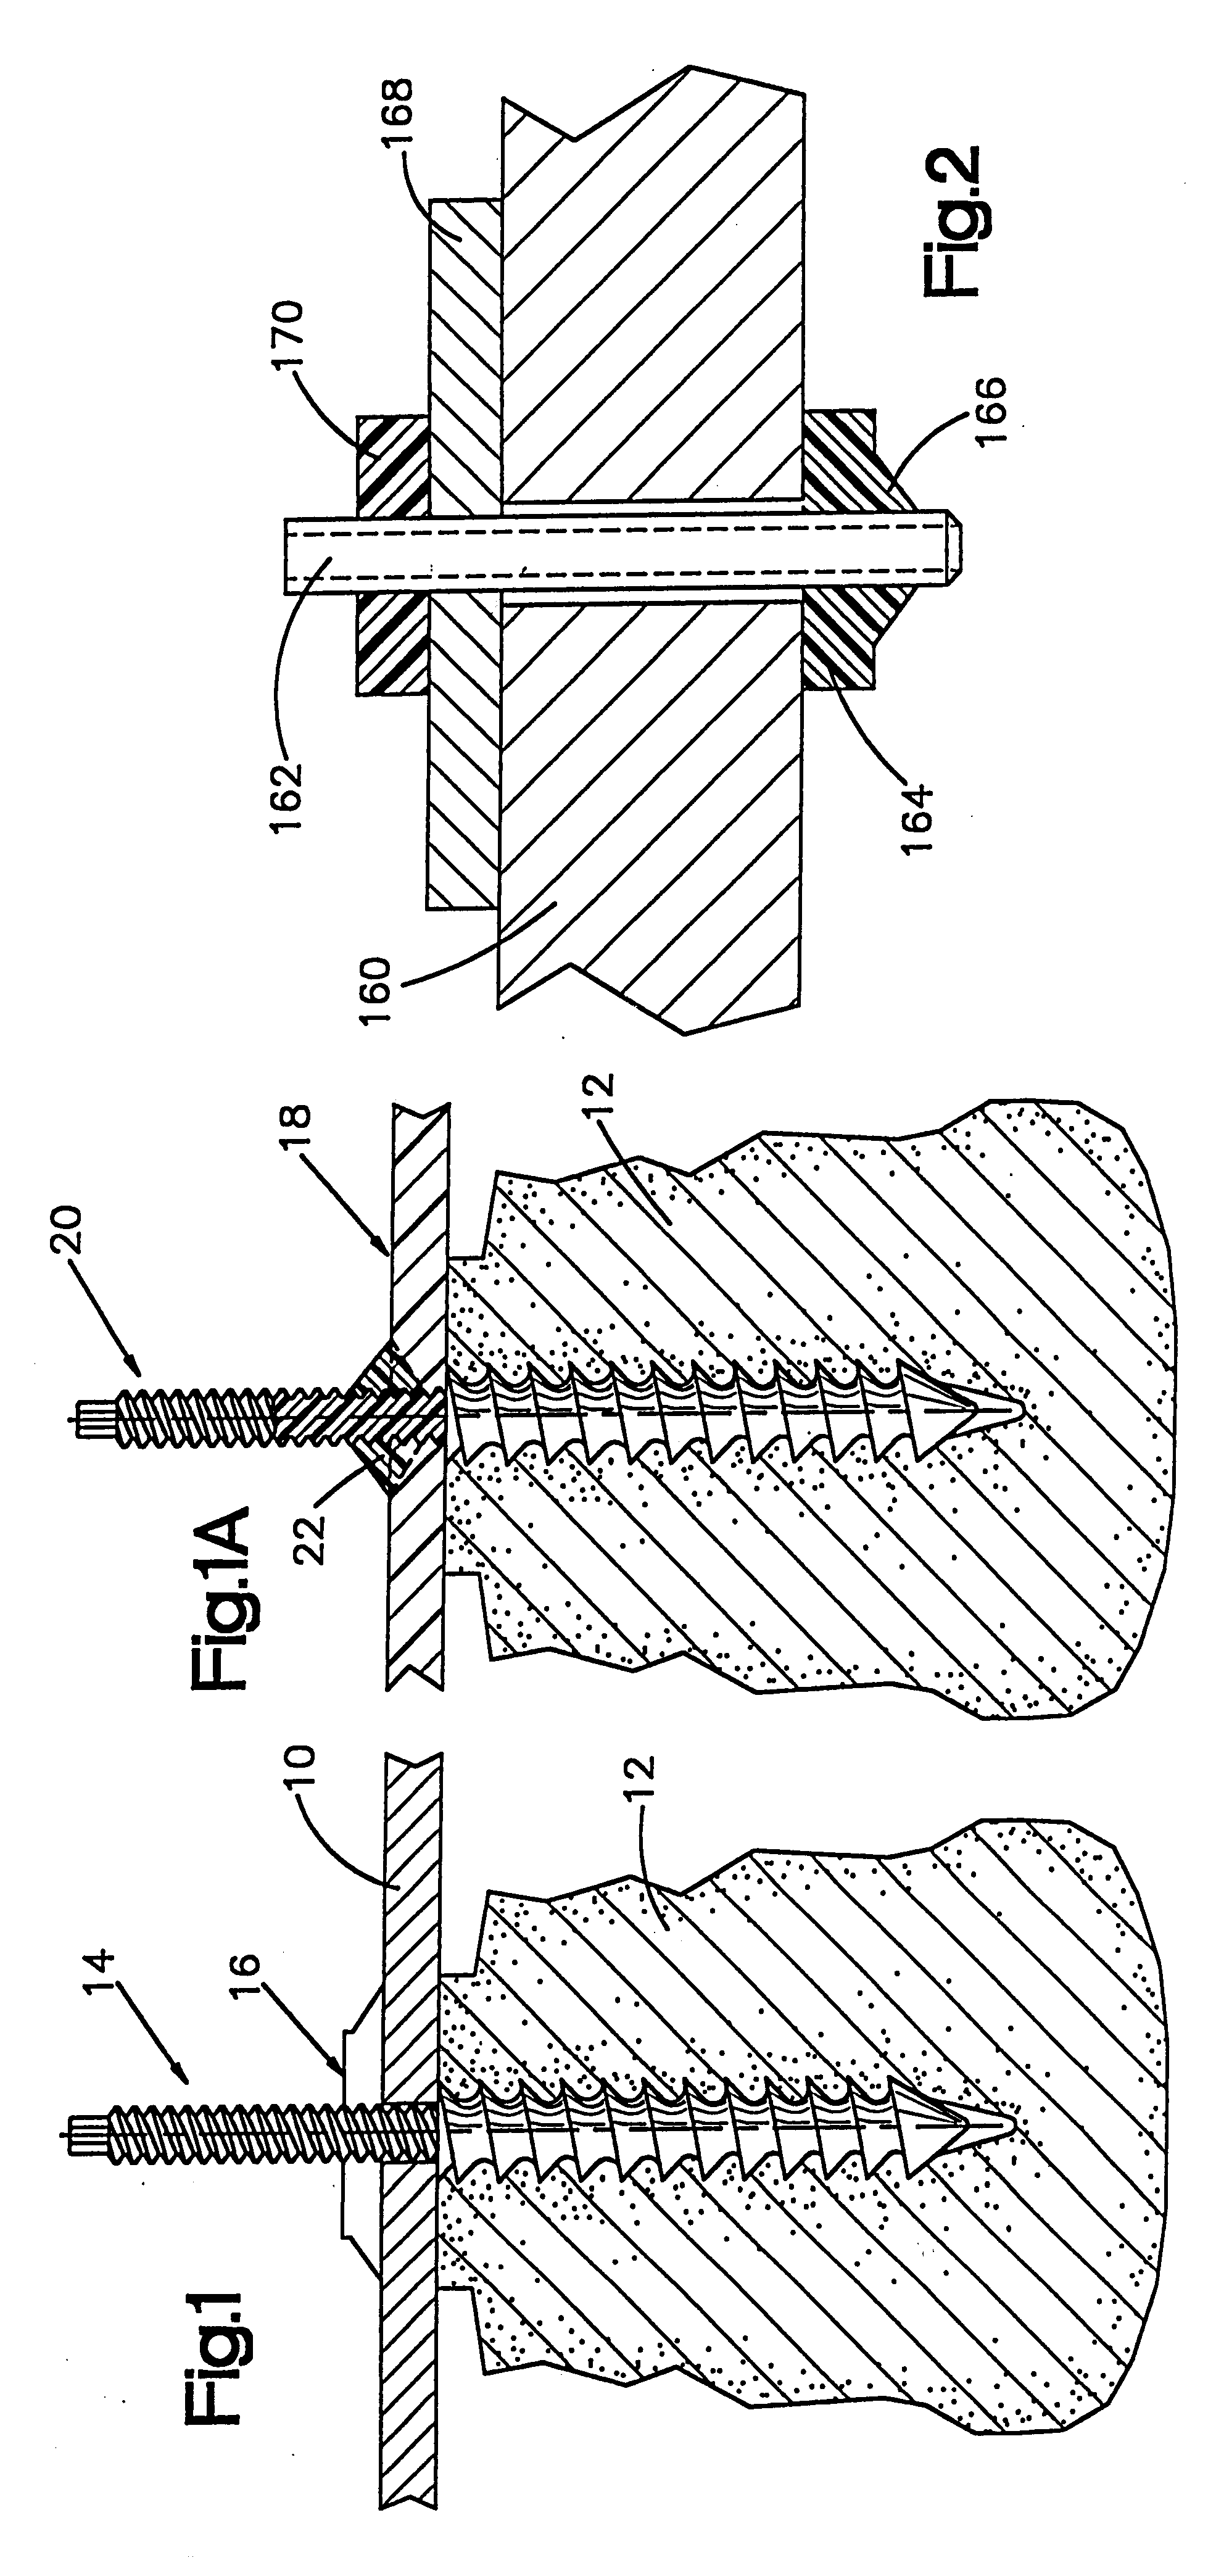 Surgical devices assembled using heat bondable materials